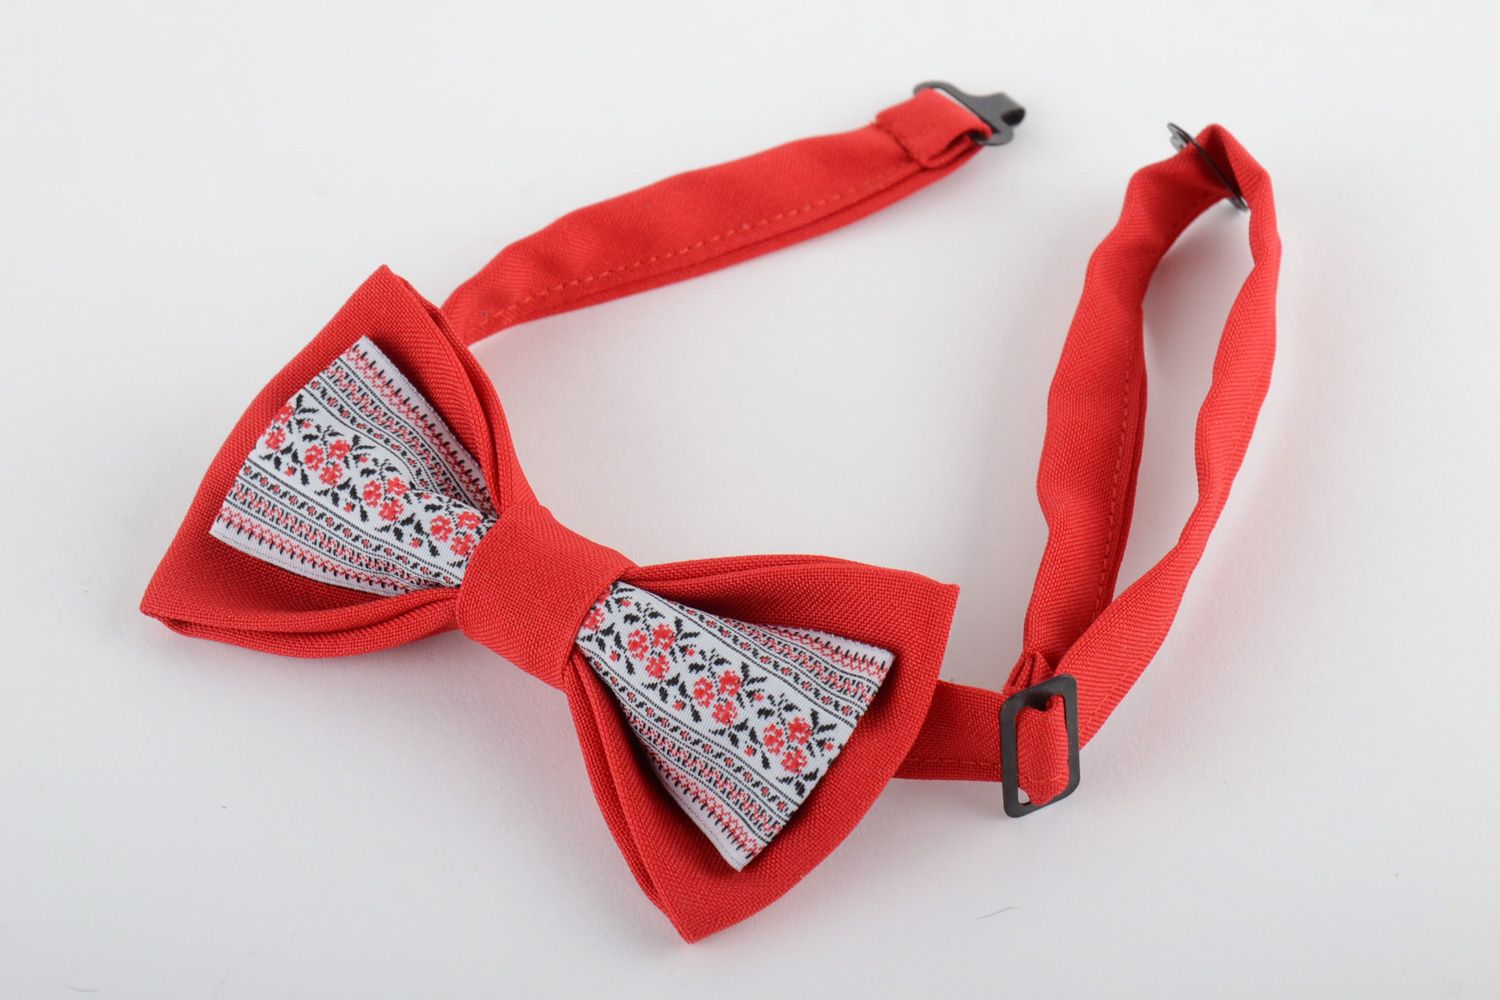 Handmade designer bow tie sewn of red and patterned fabrics in ethnic style photo 2